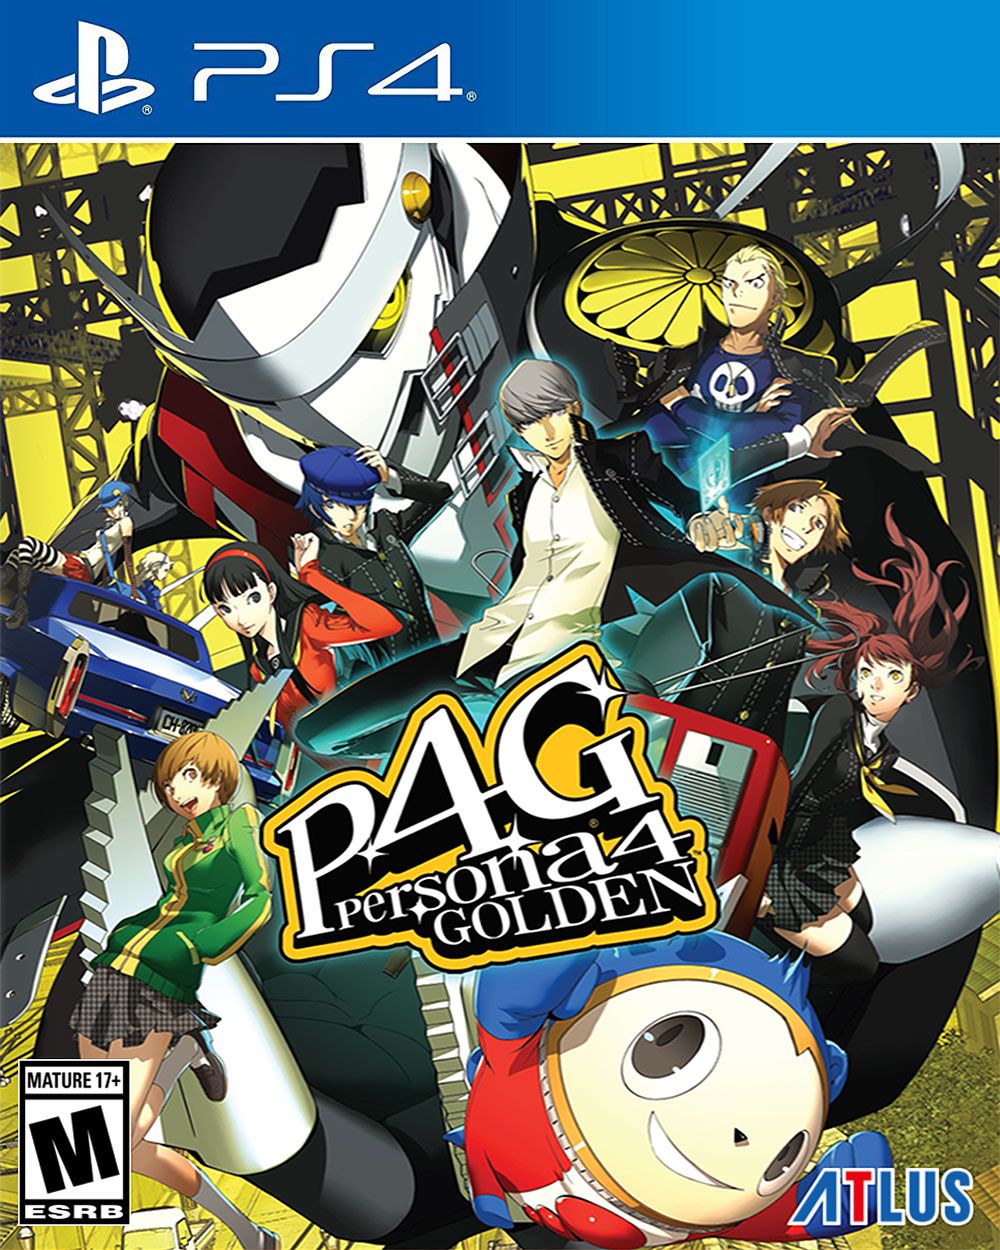 Persona 4: Golden (NTSC/U)(PS4)(New) | Buy from Pwned Games with ...